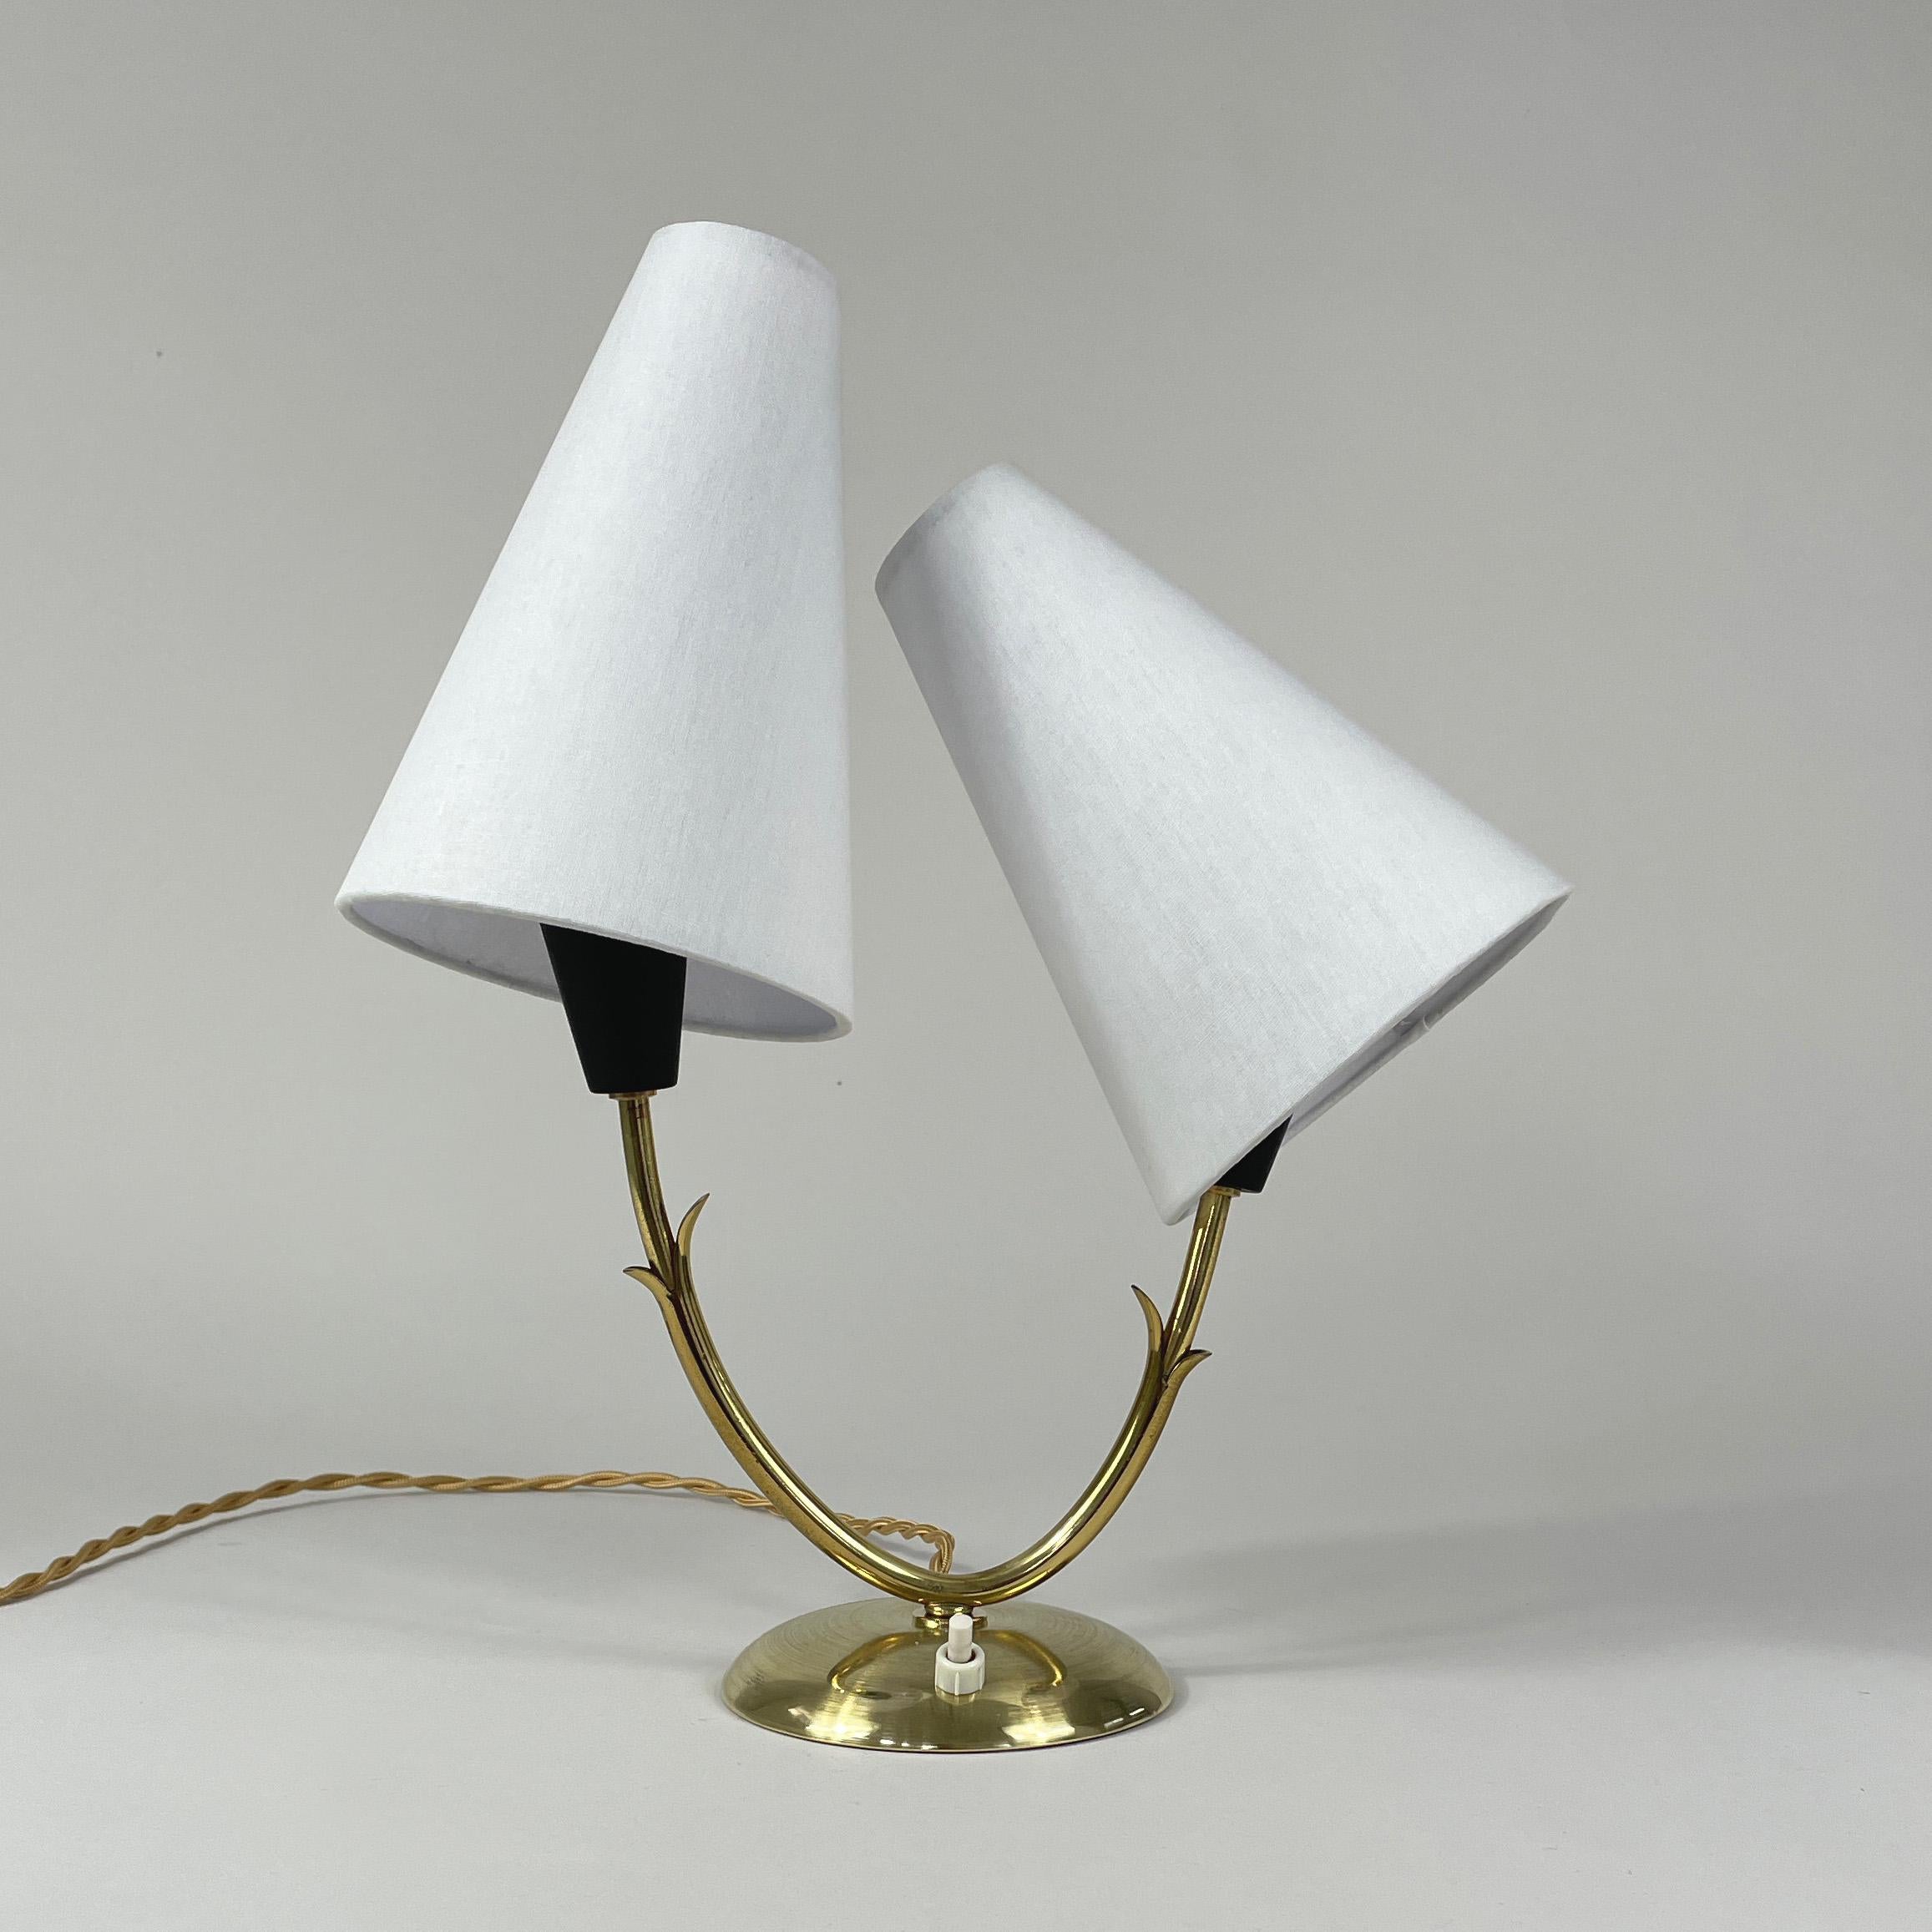 Double Arm Brass Table Lamp, Sweden 1950s For Sale 3